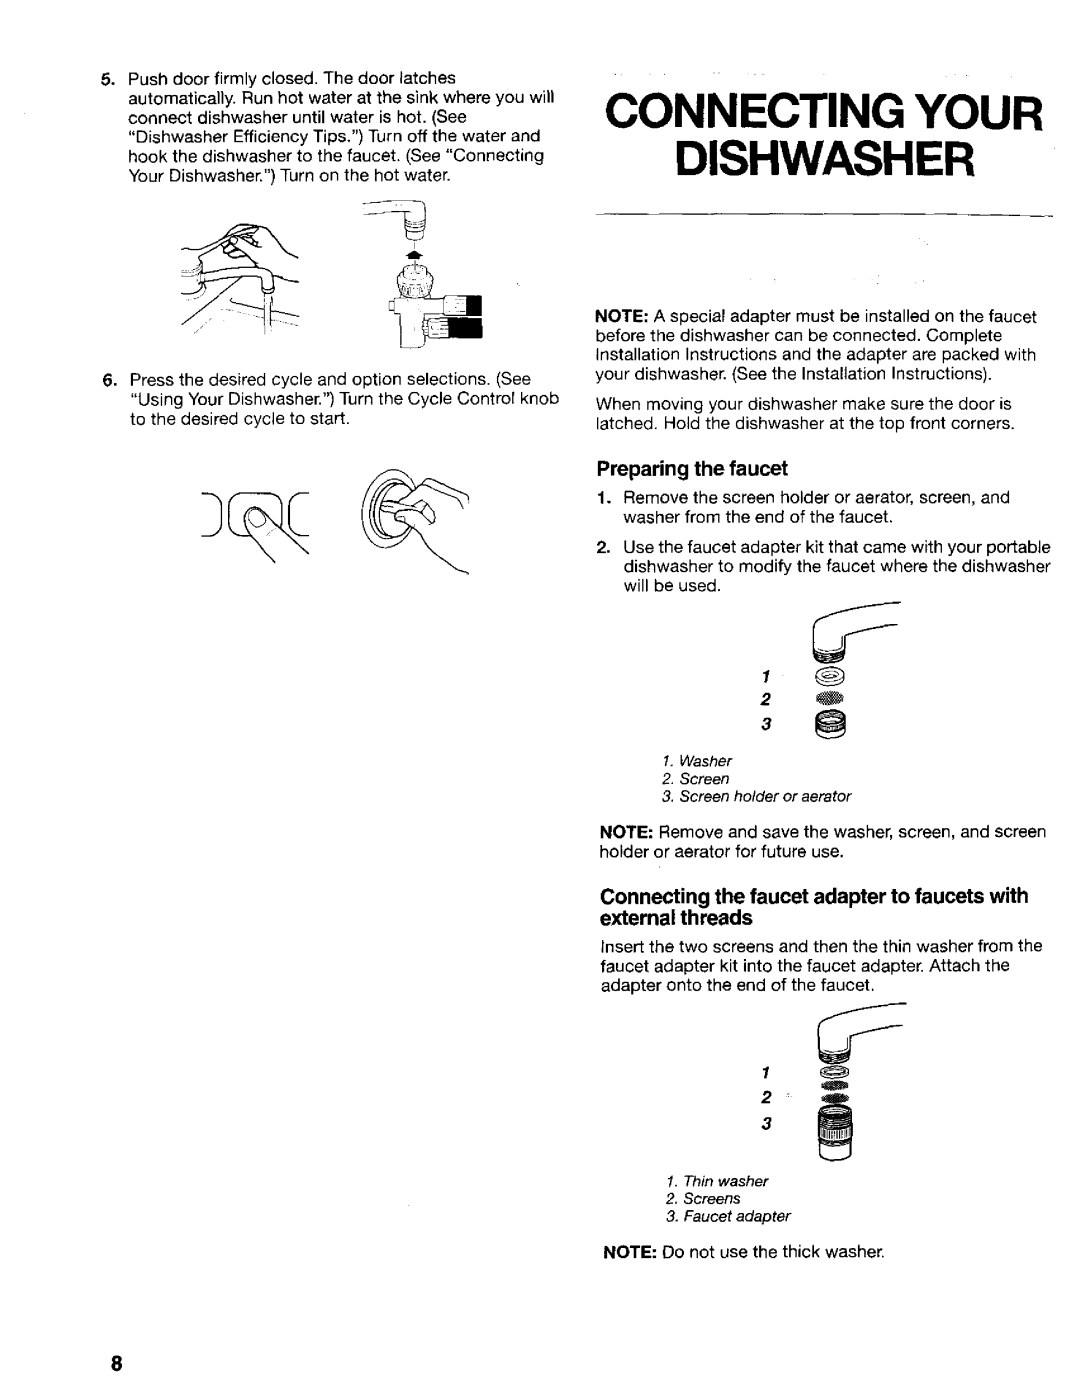 Kenmore 665.17422, 665.17425 manual Dishwasher, Connecting Your, Preparing the faucet 